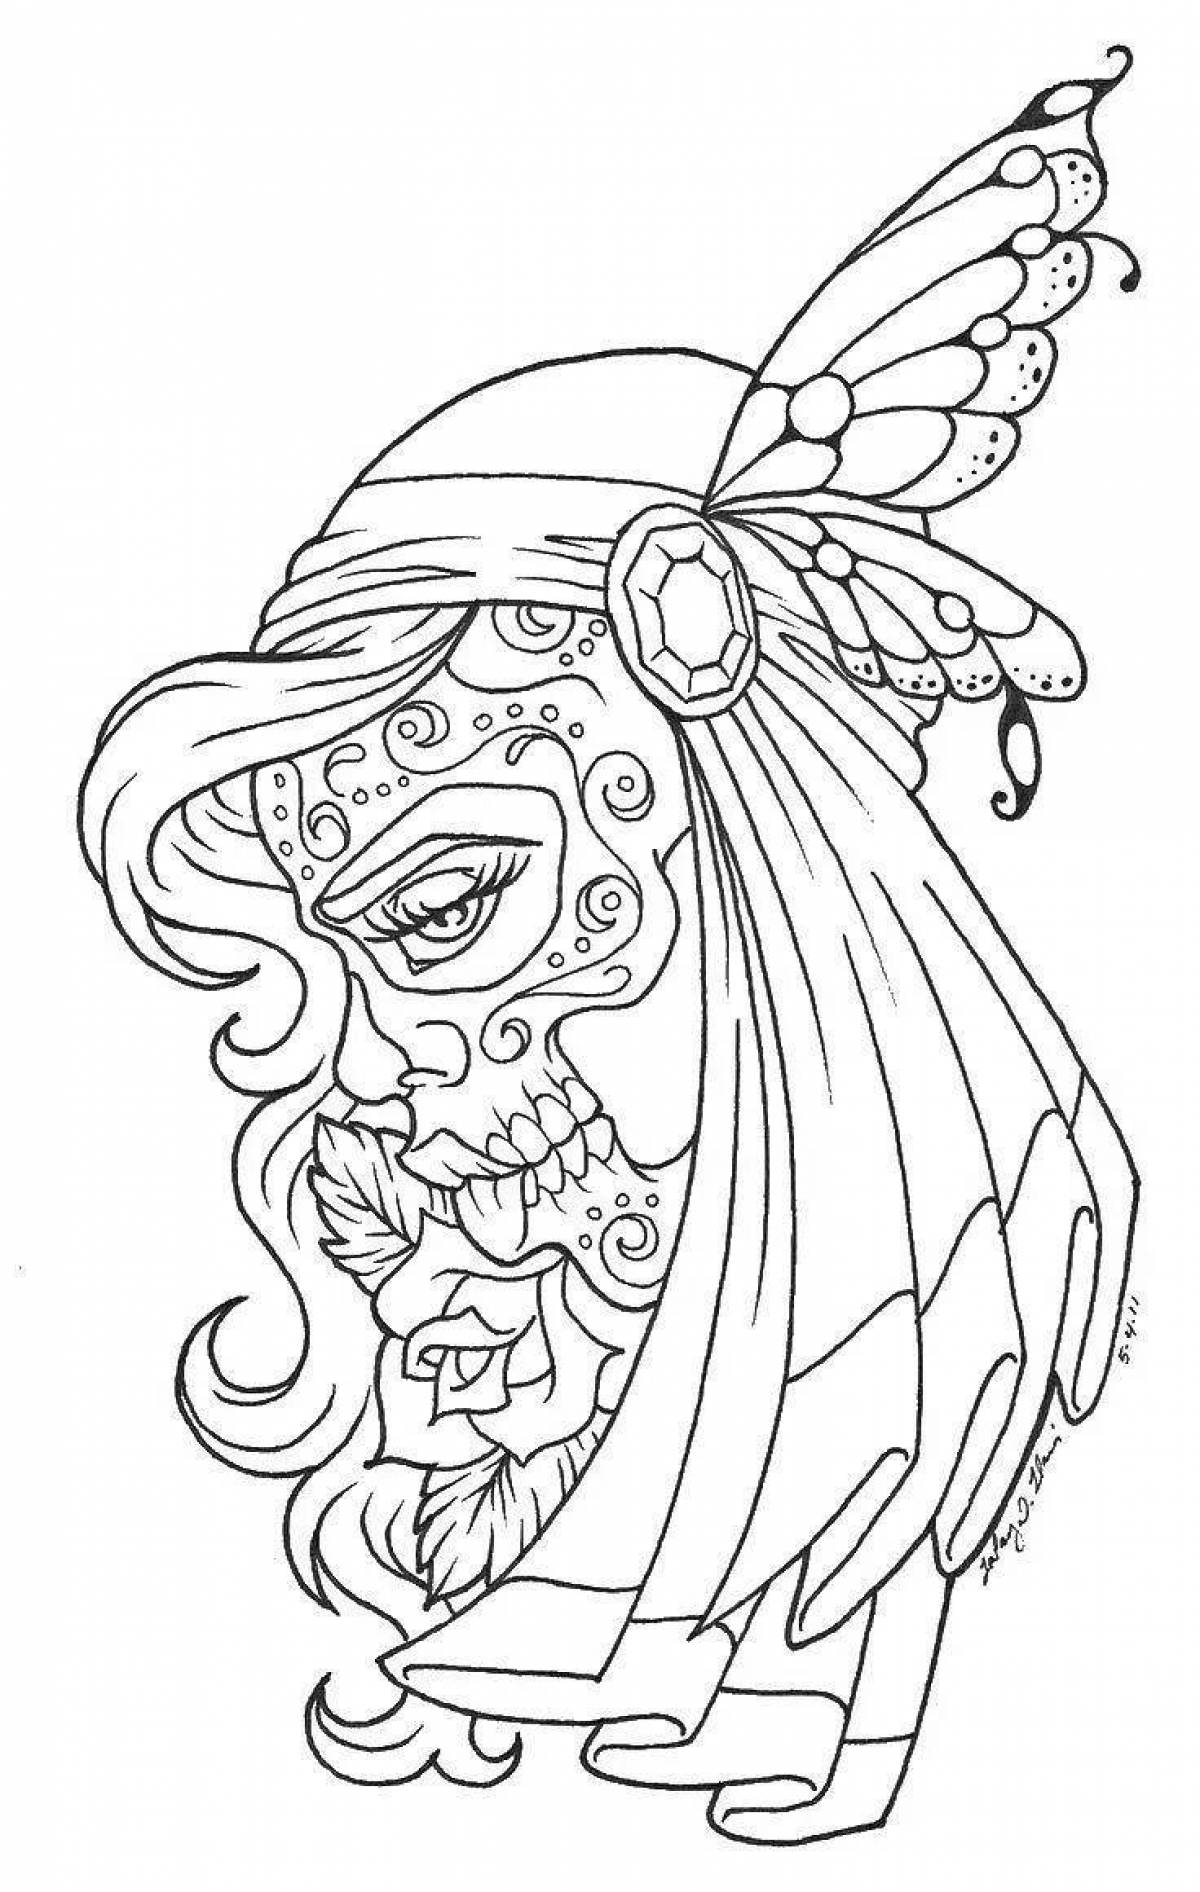 Sinister coloring book for girls